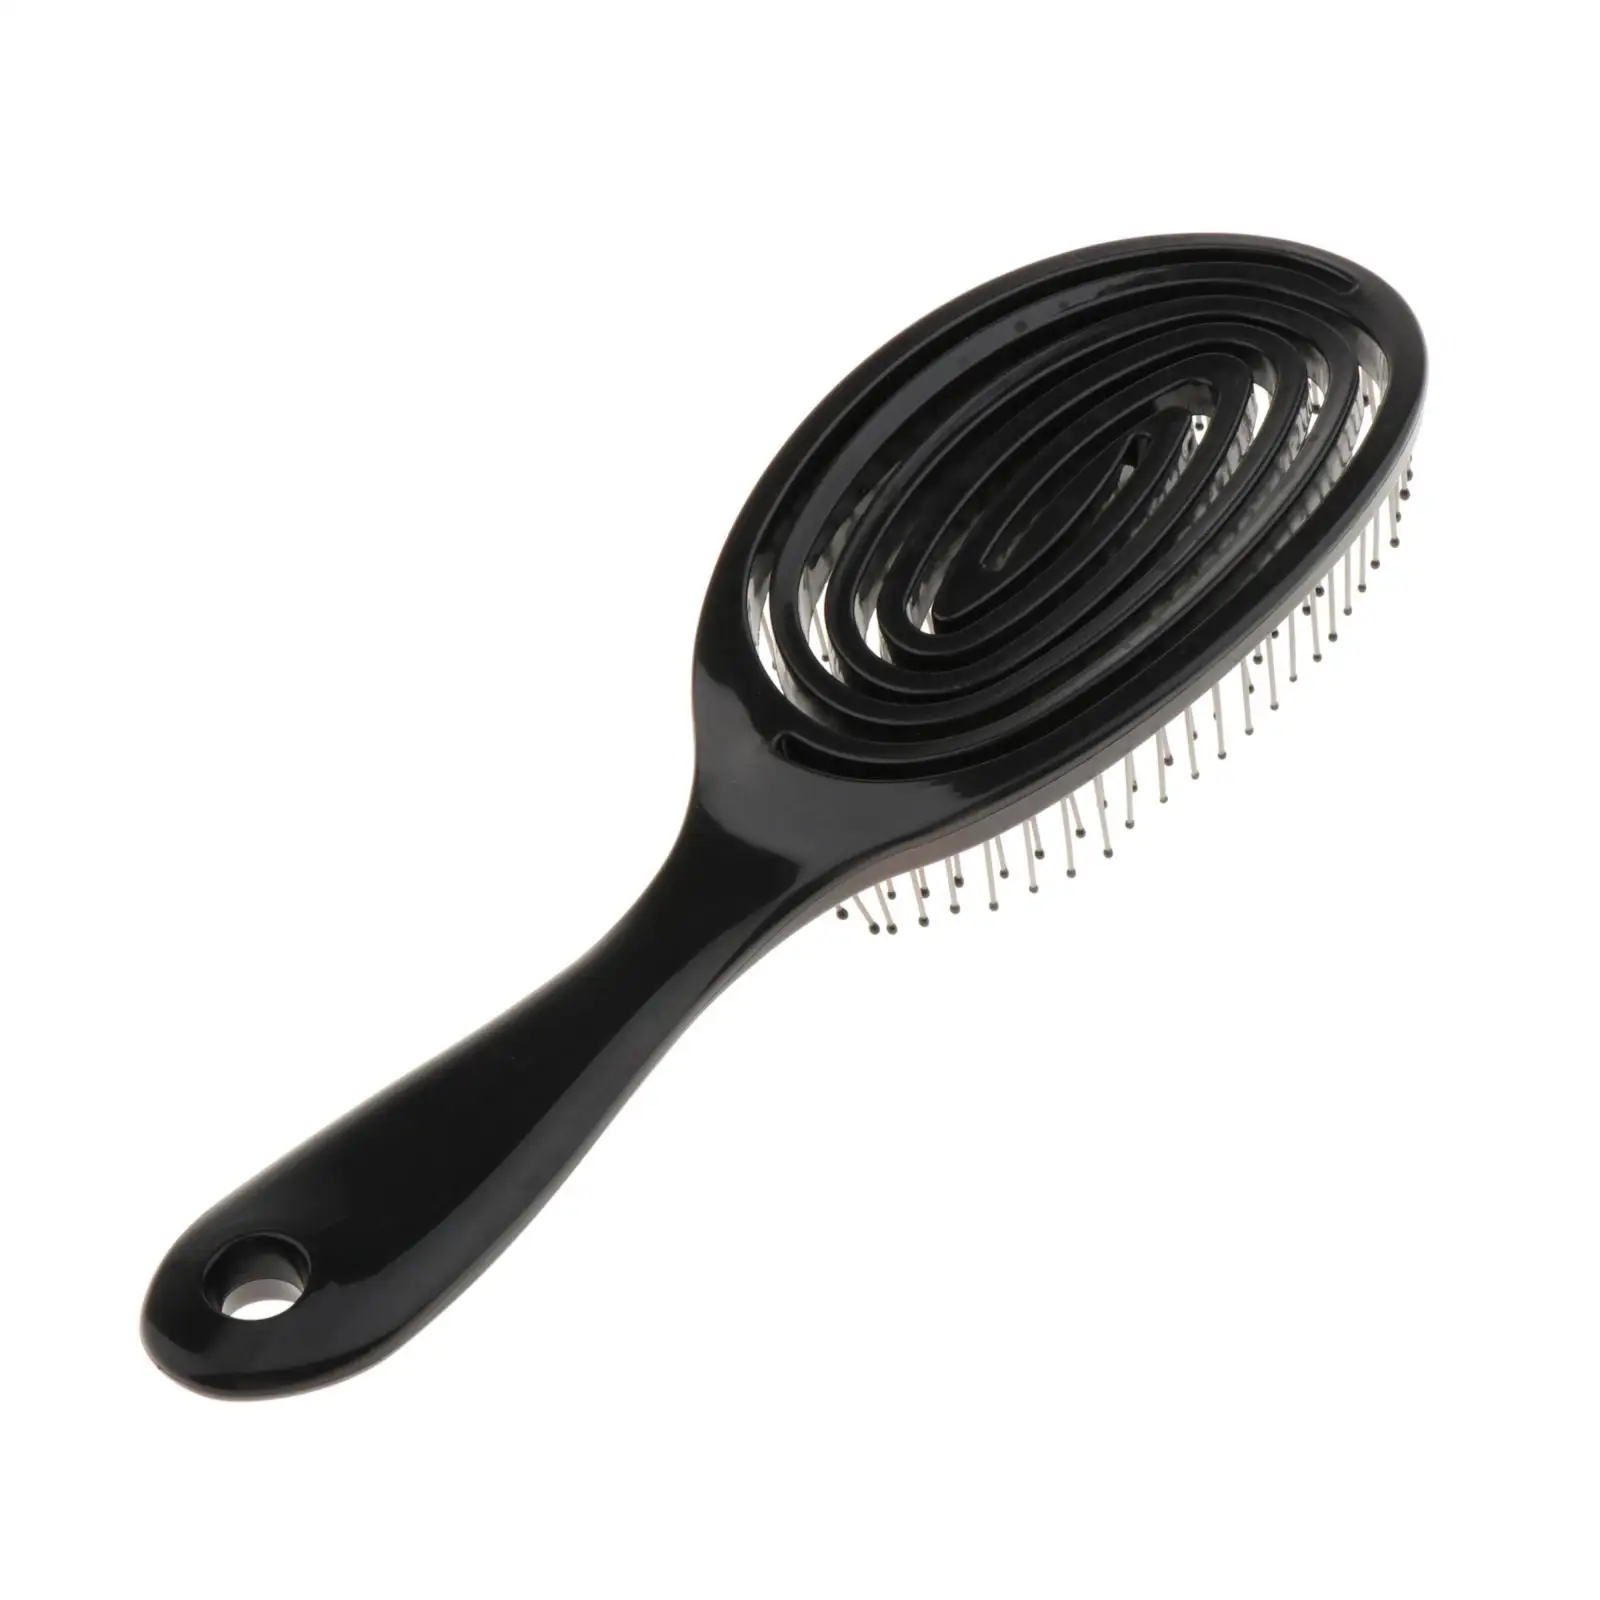 3Pieces Comb Hair Brush Styling for Curly Wet Hairbrush Shower Salon Natural